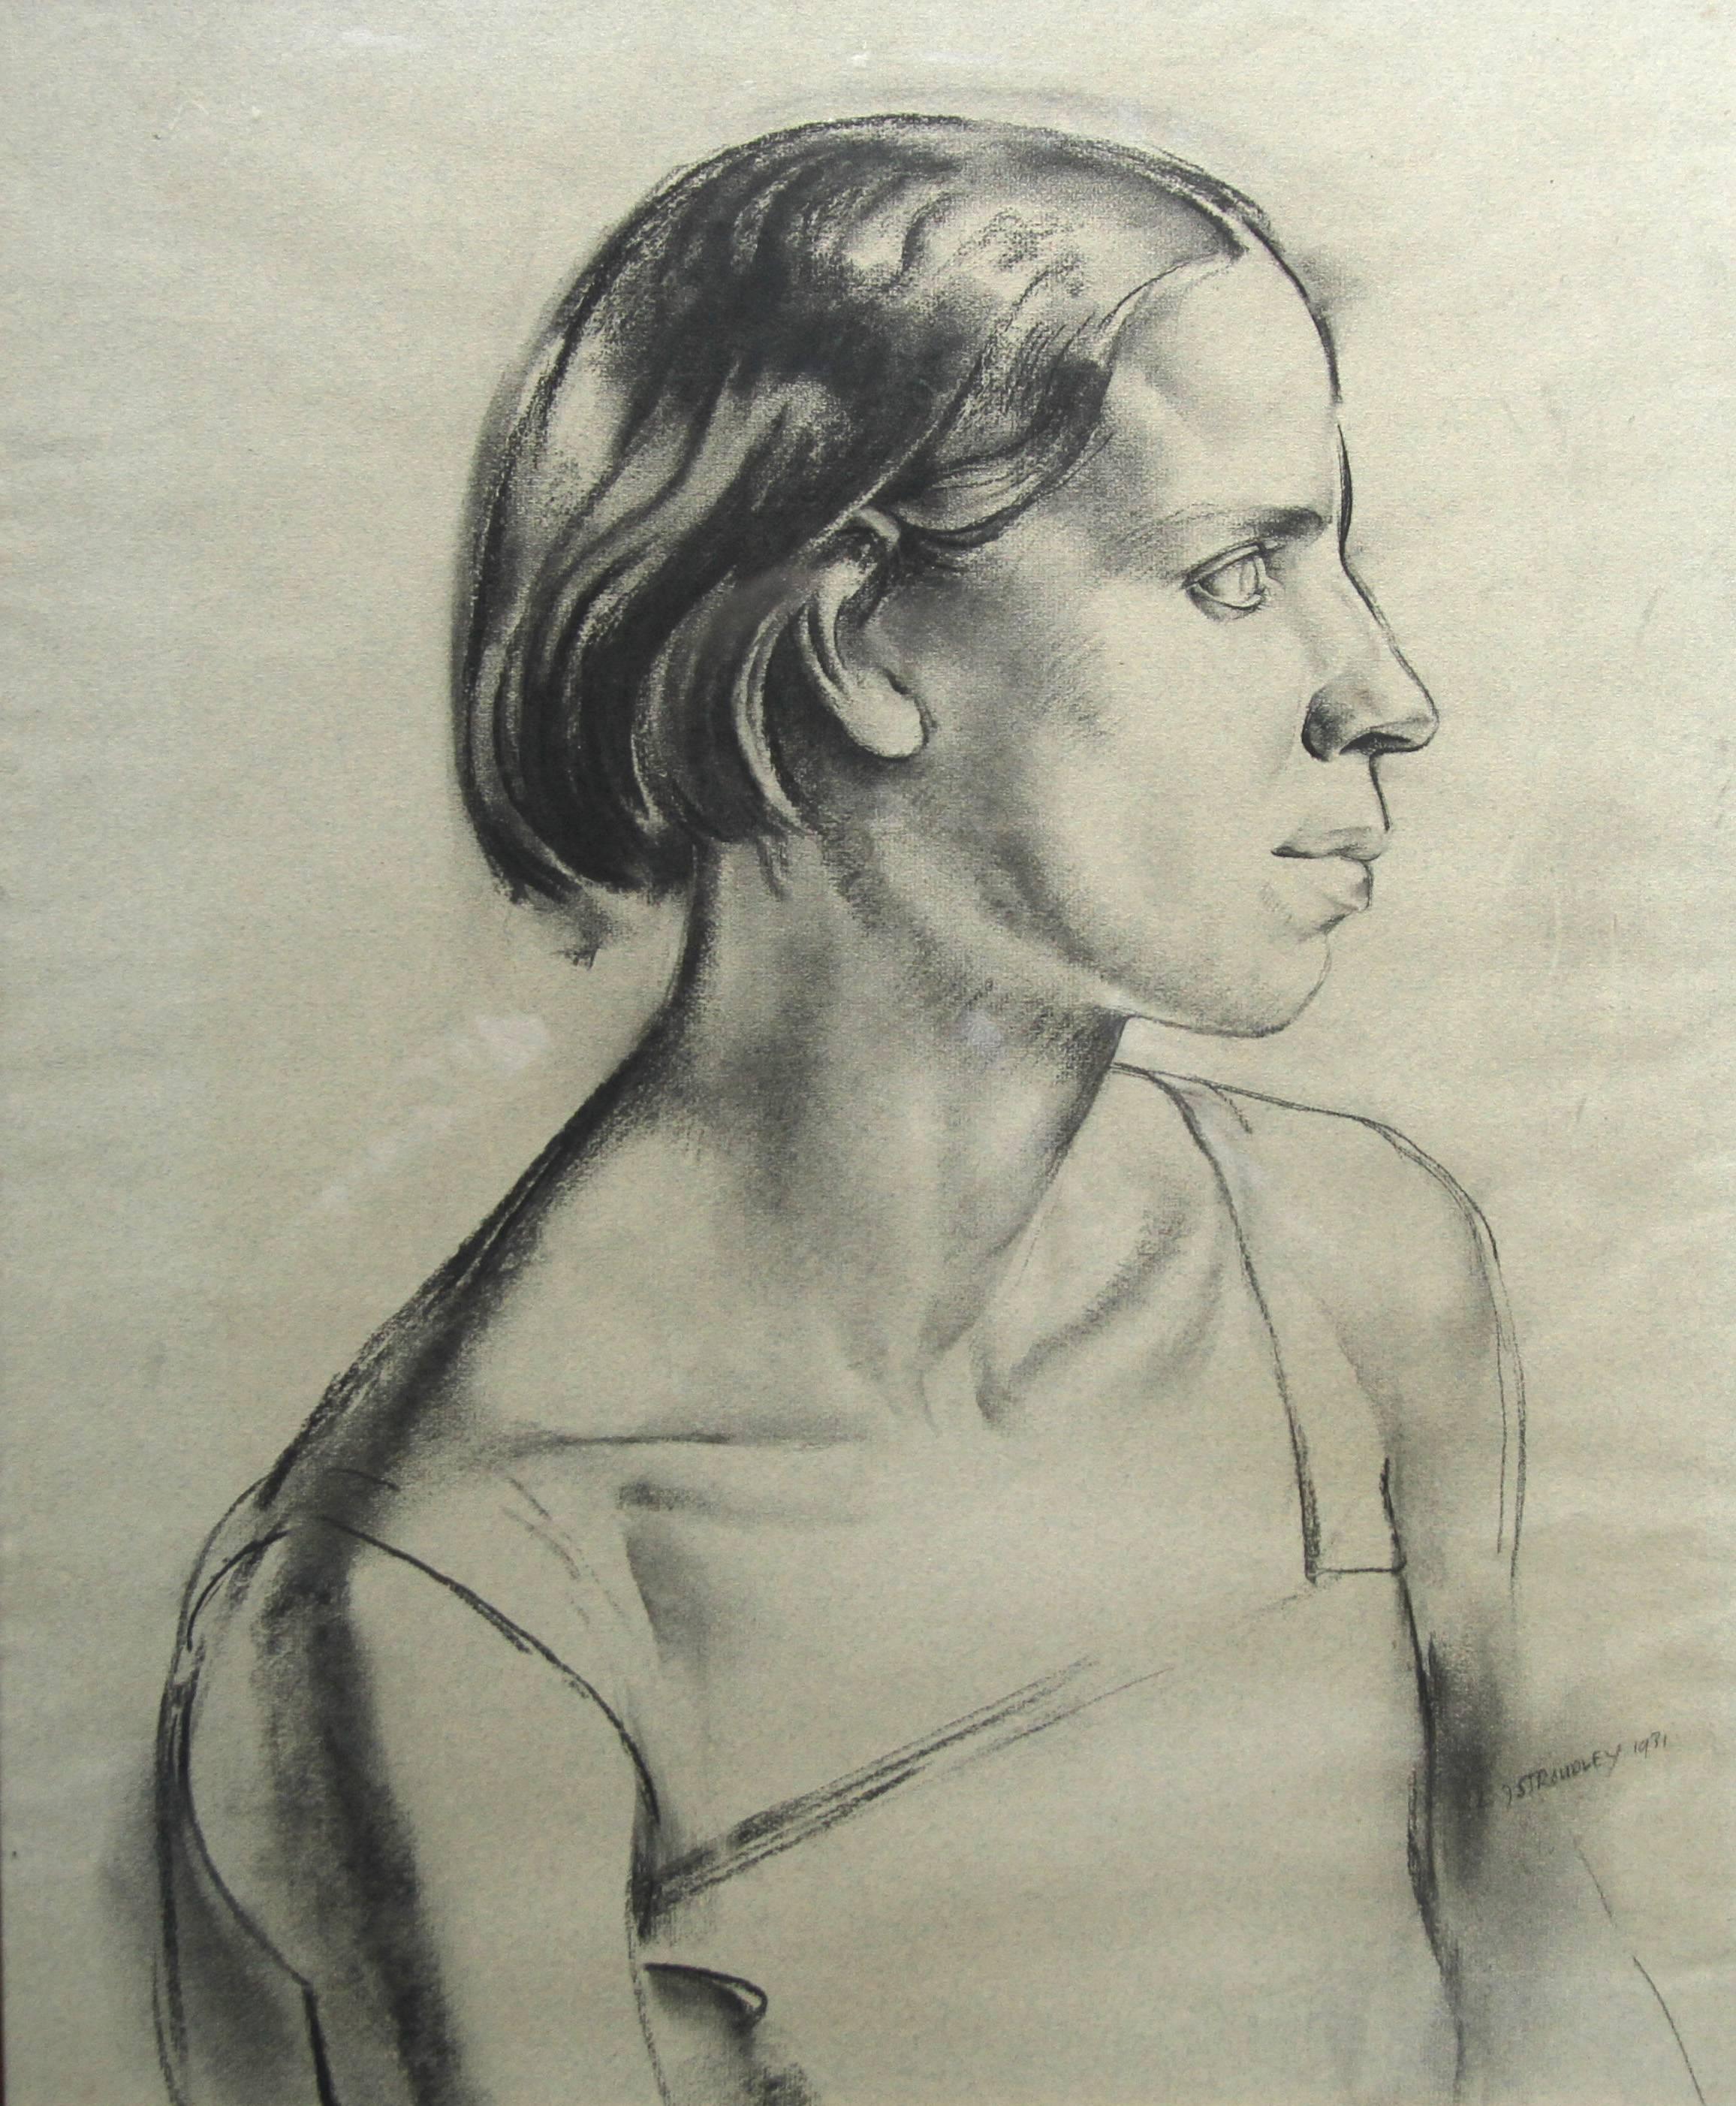 A fine large charcoal and pencil drawing by British listed artist James Stroudley. Executed in 1931, it is a stunning example of a 1930s Art Deco portrait. Very strong and bold, it depicts a portrait of a young woman. It is very evocative and in